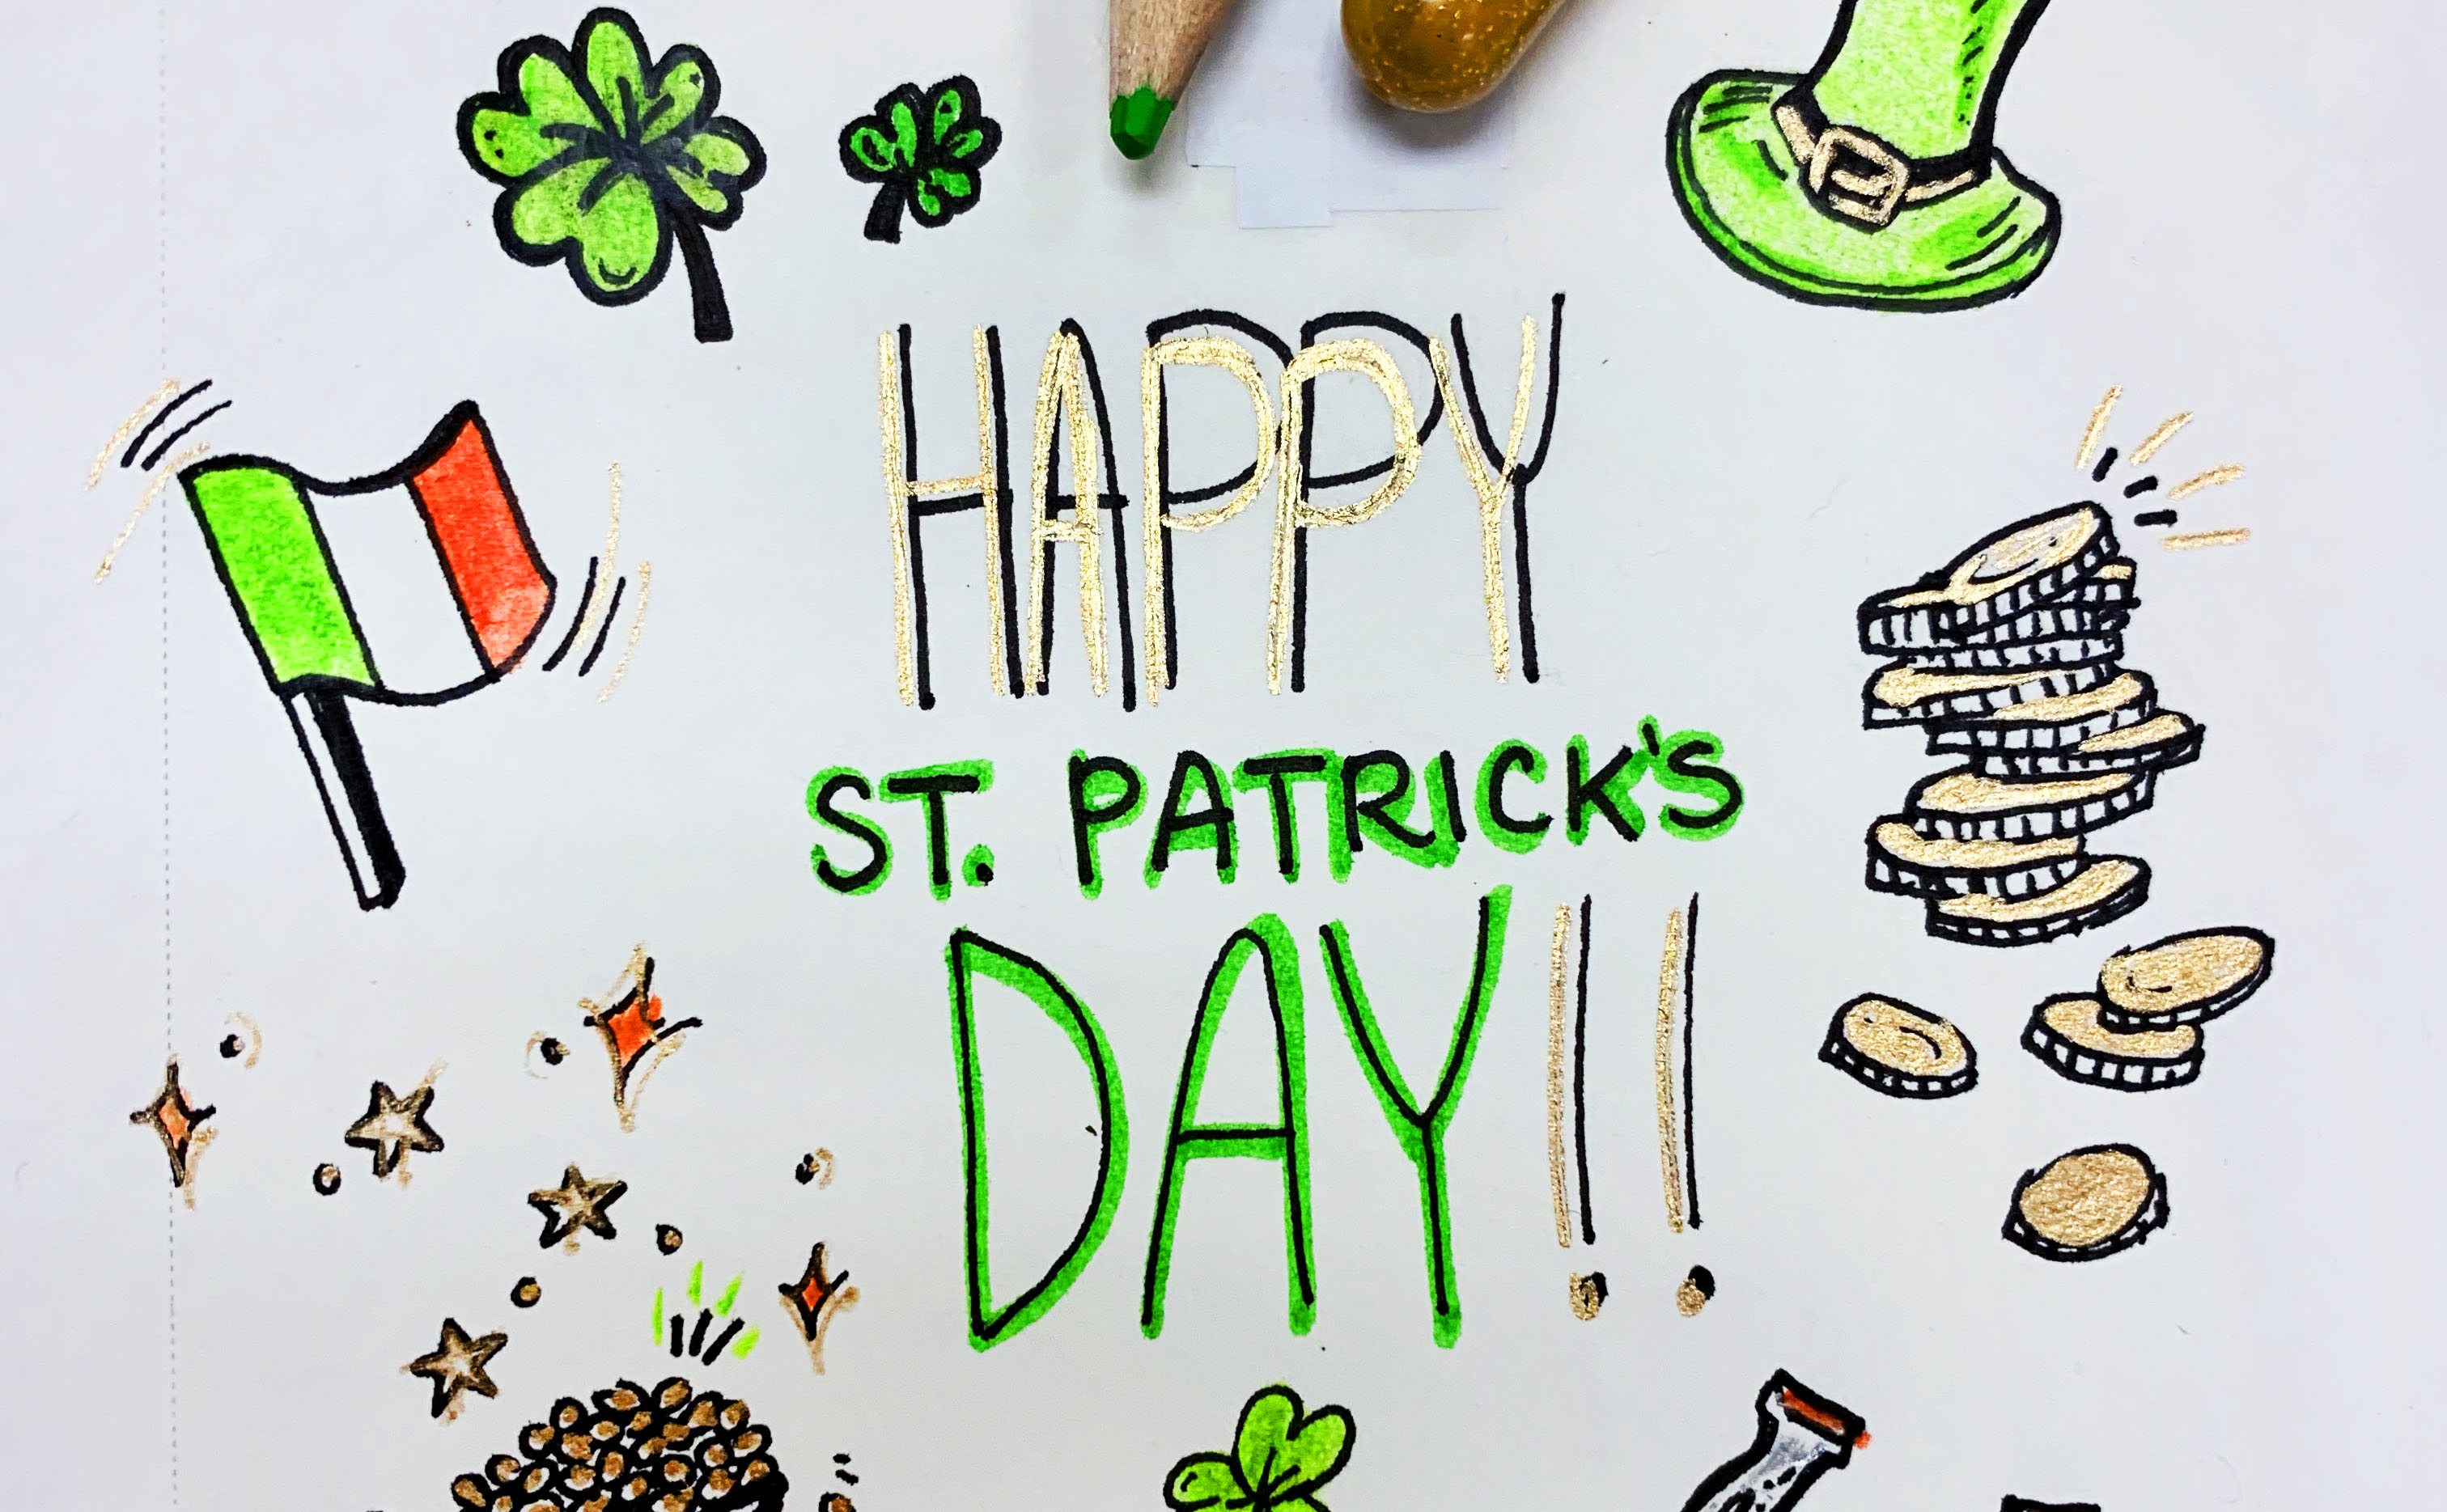 St. Patrick’s Day folklore to explore